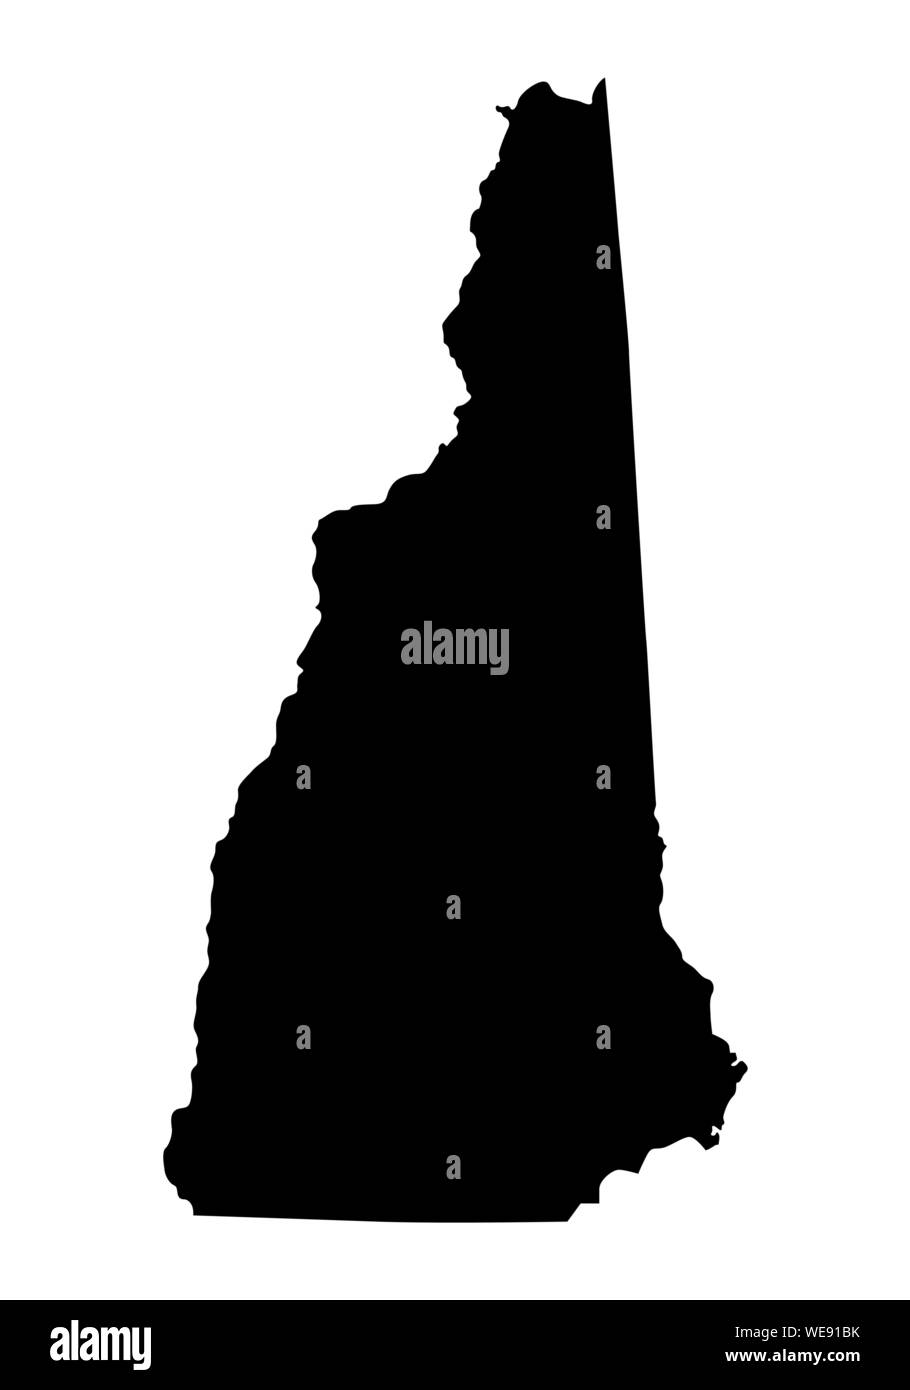 New Hampshire silhouette map Stock Vector